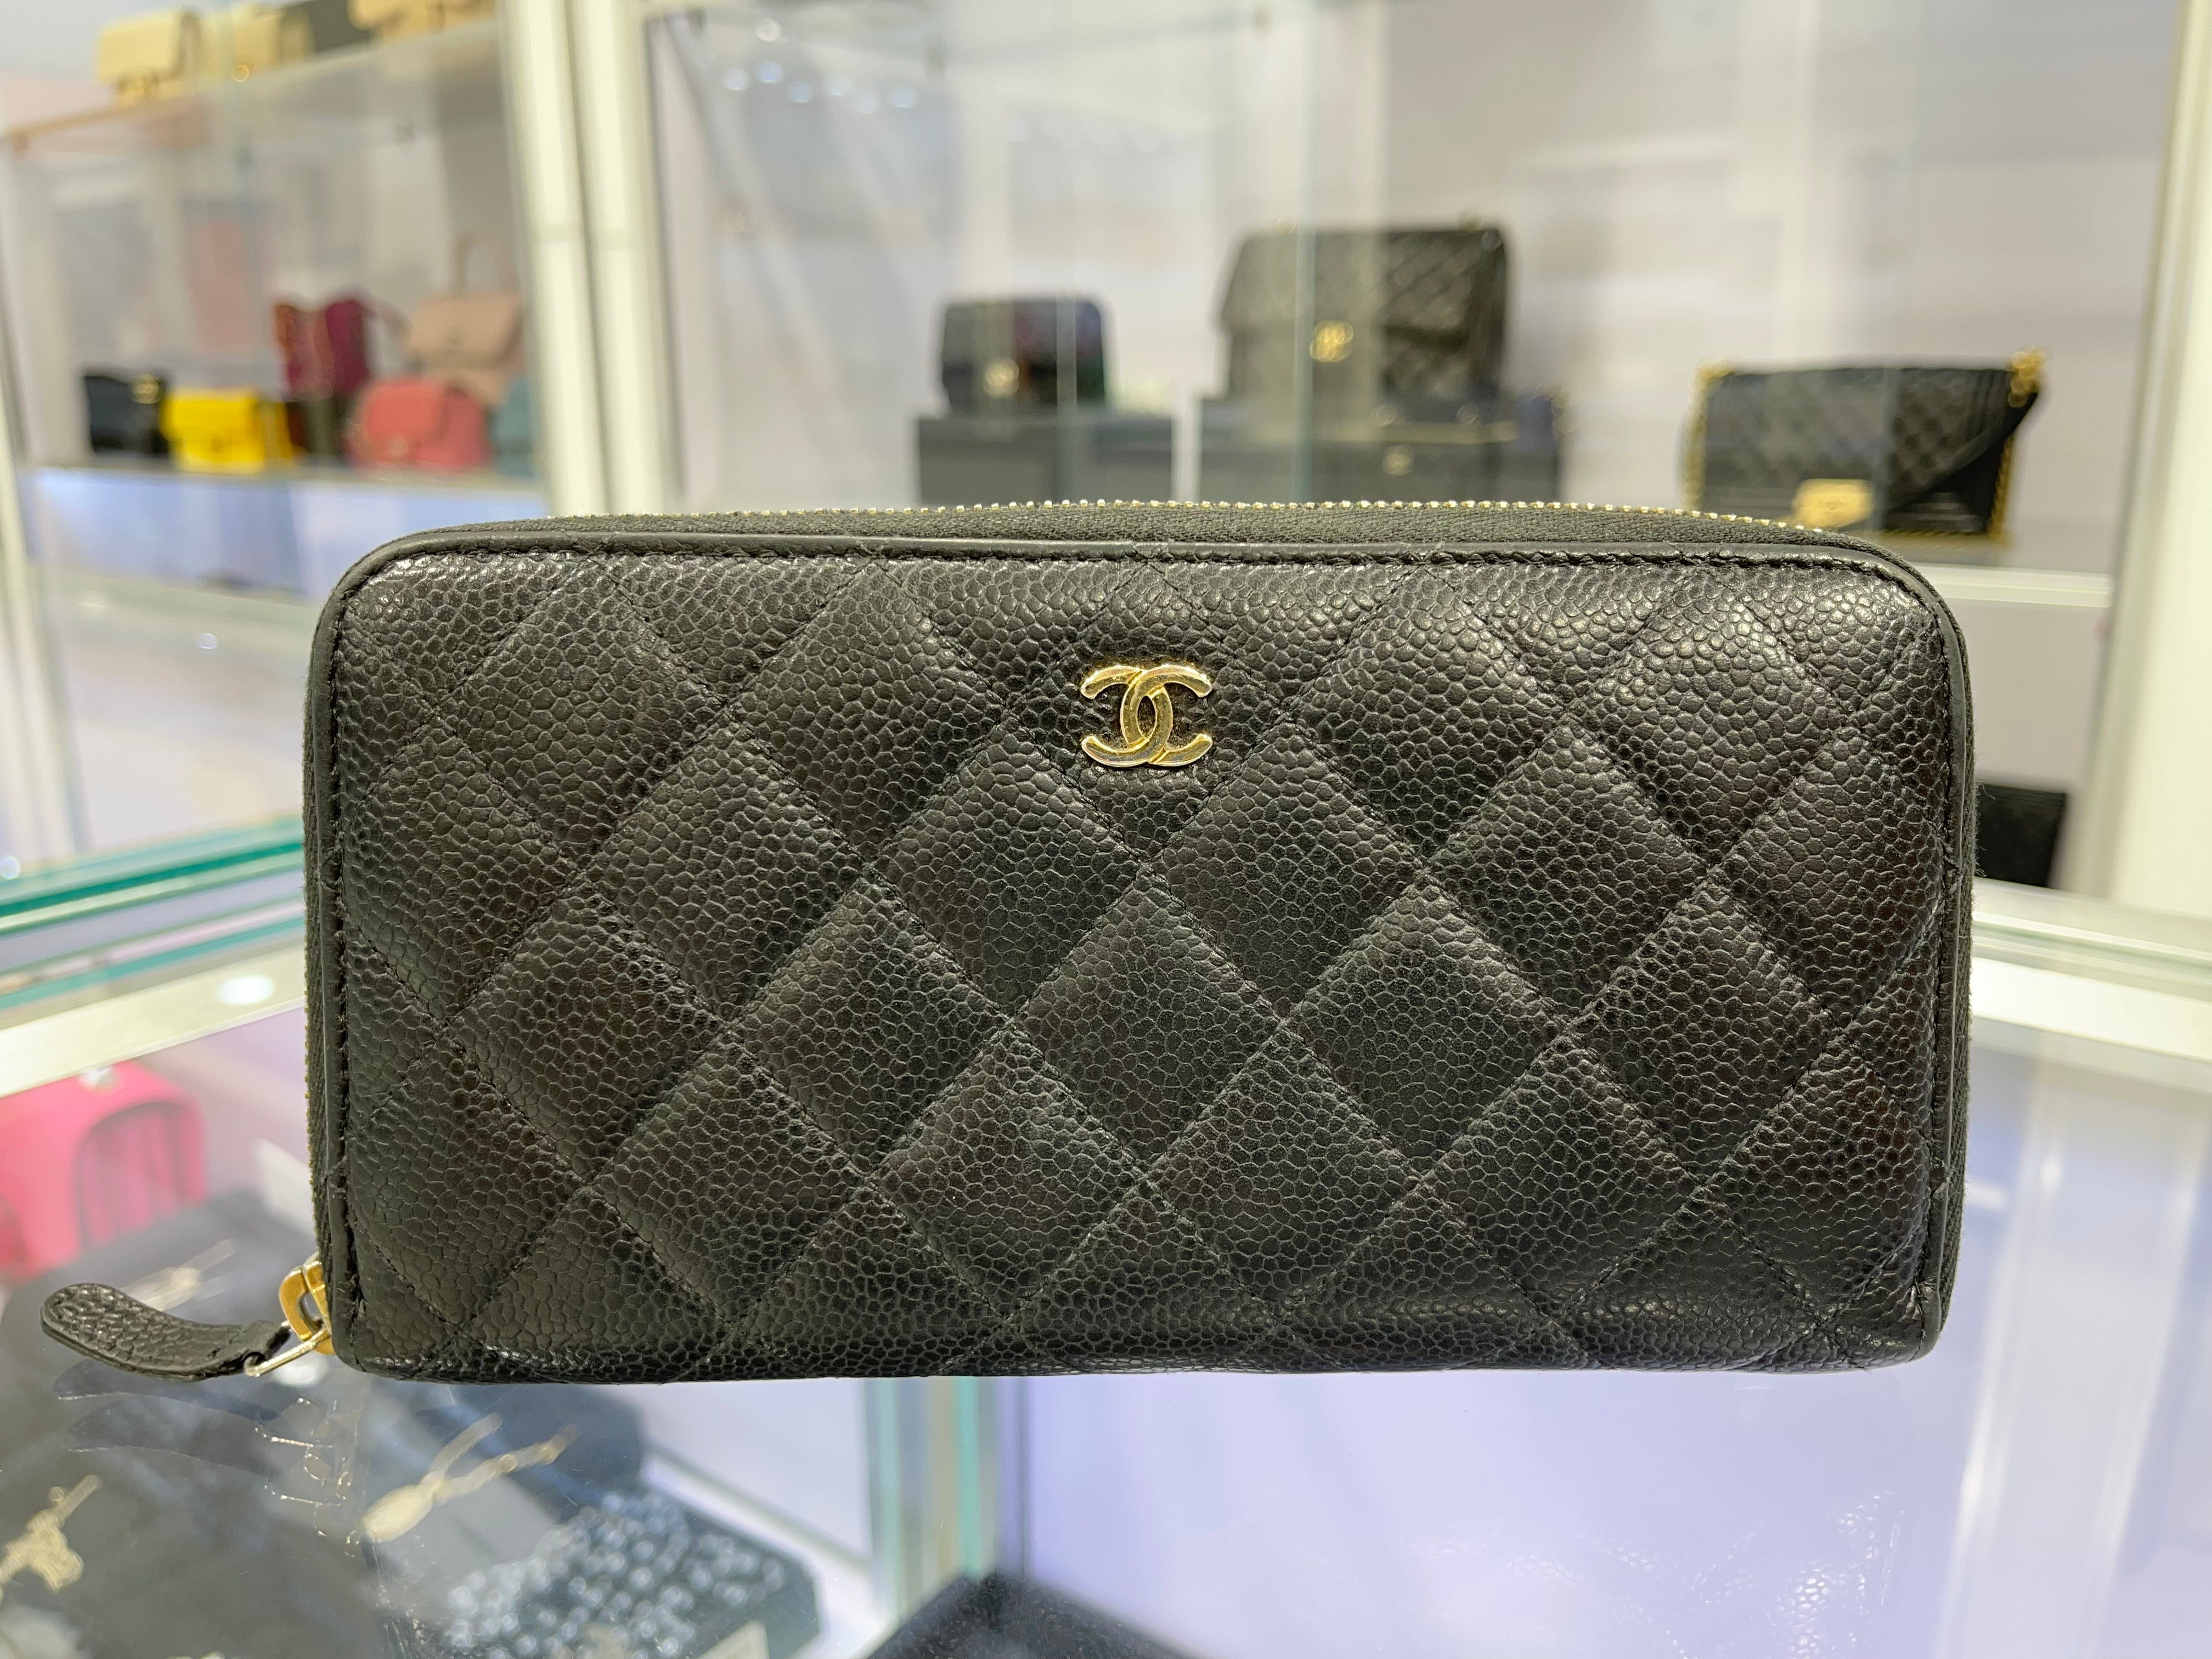 CHANEL, Bags, Chanel Black Leather Studded Cc Zip Around Wallet